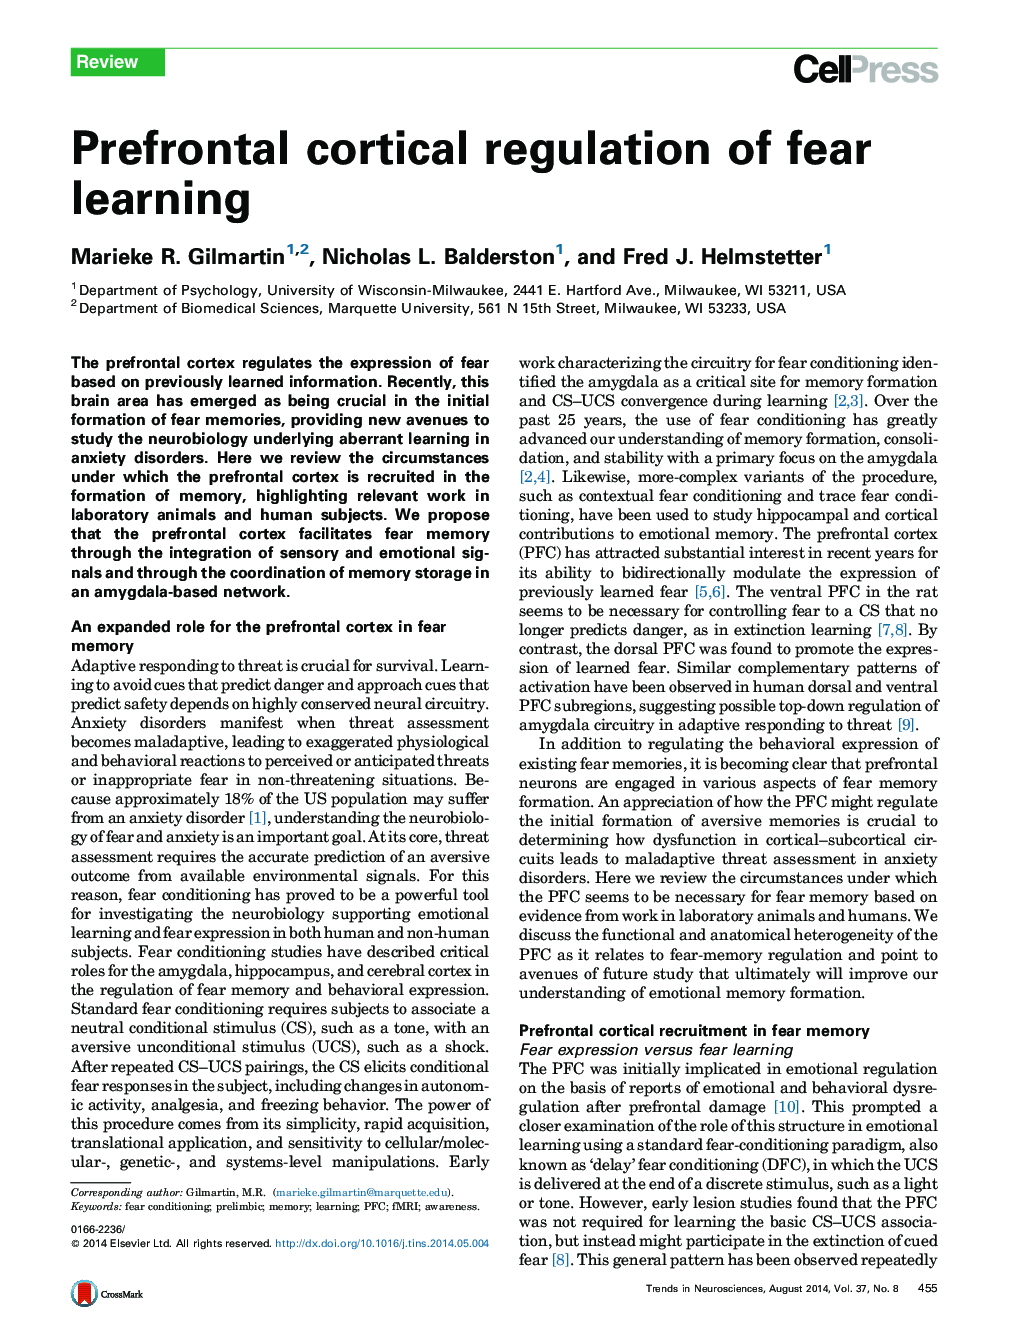 Prefrontal cortical regulation of fear learning